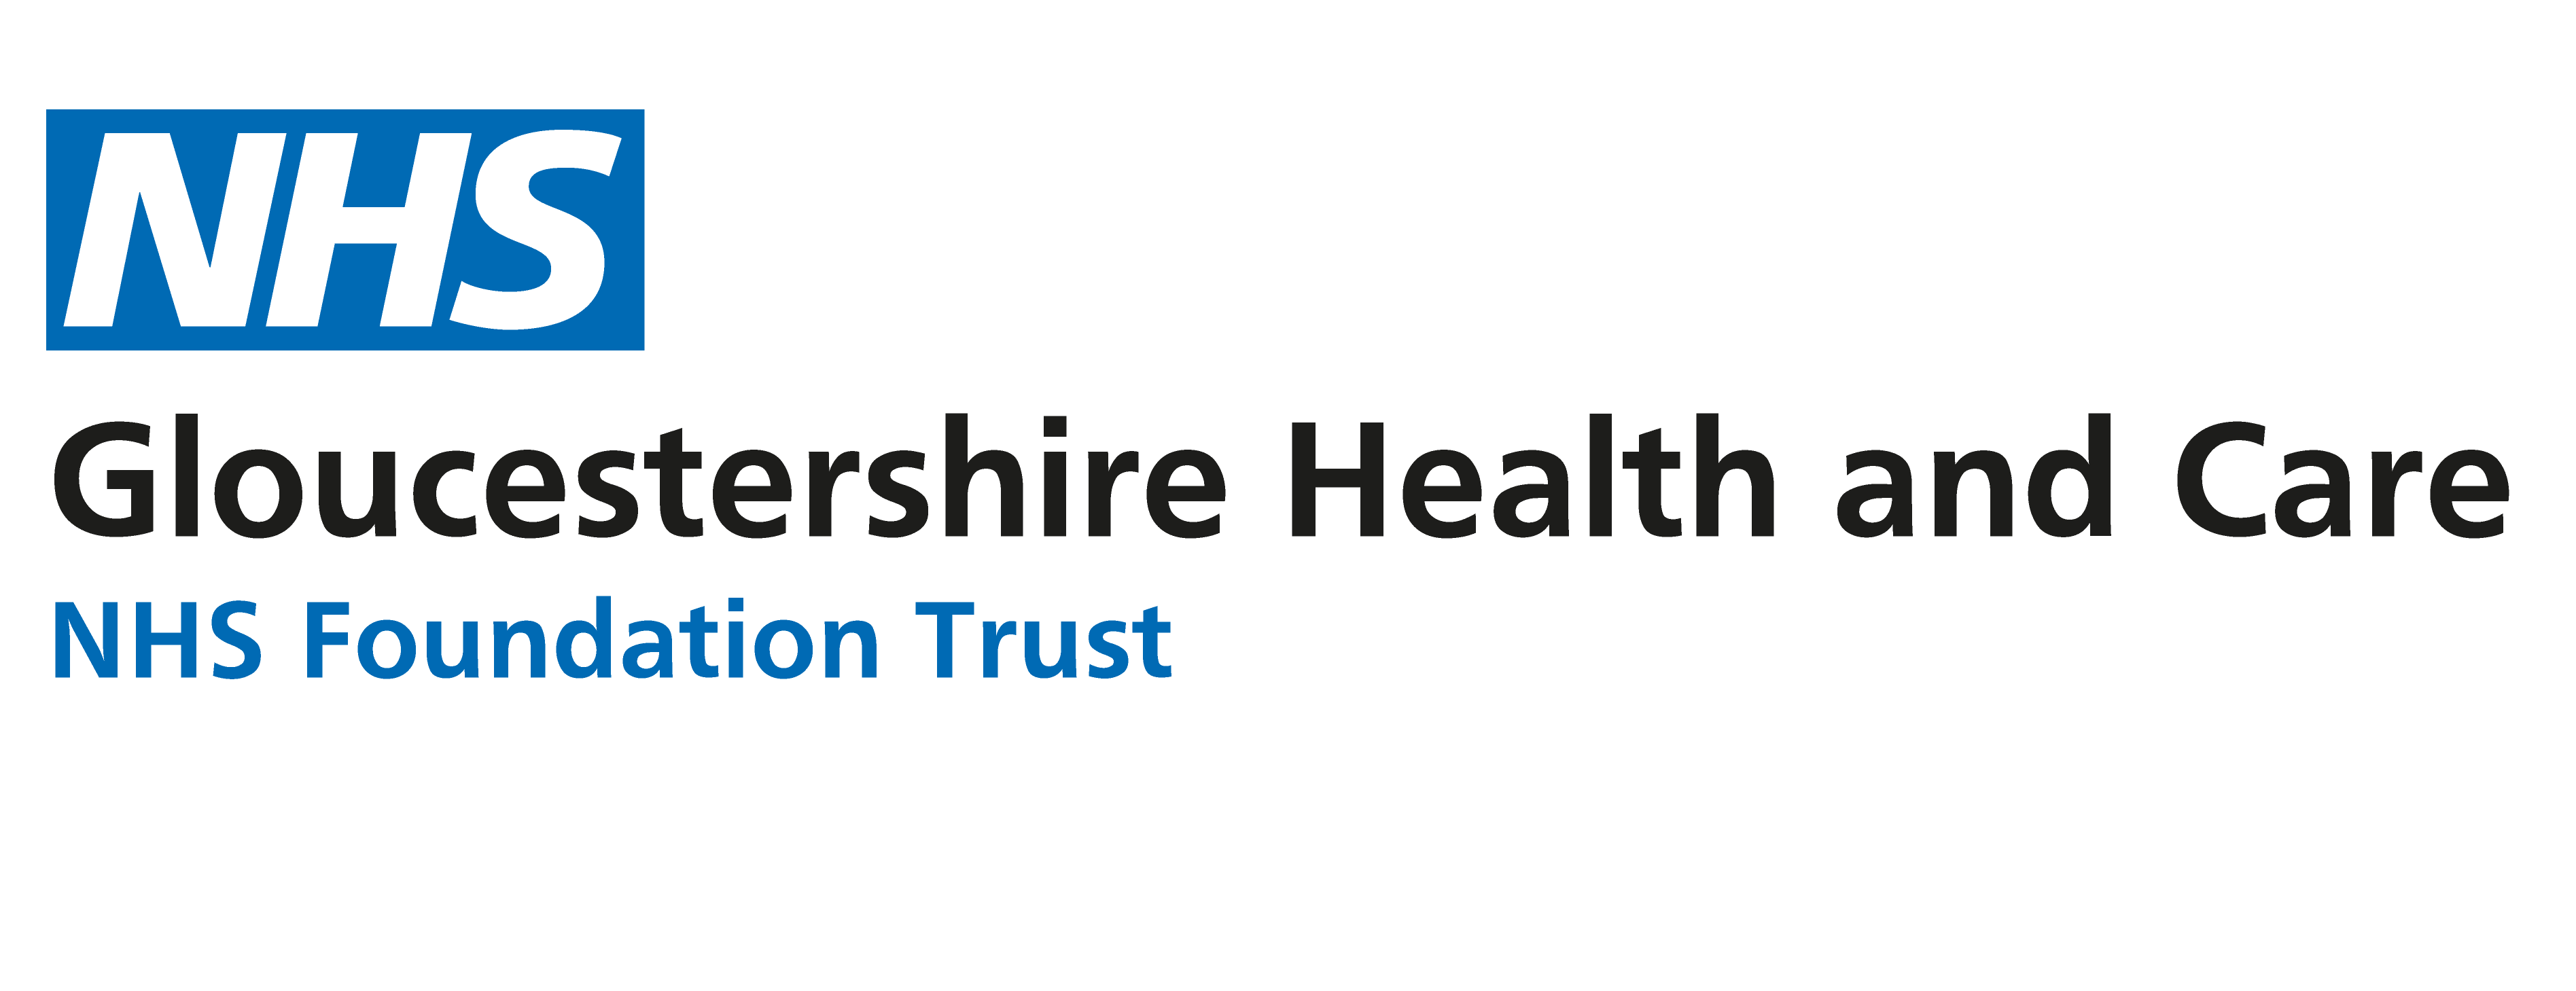 Gloucestershire Health and Care NHS Foundation Trust – Non-Executive Director